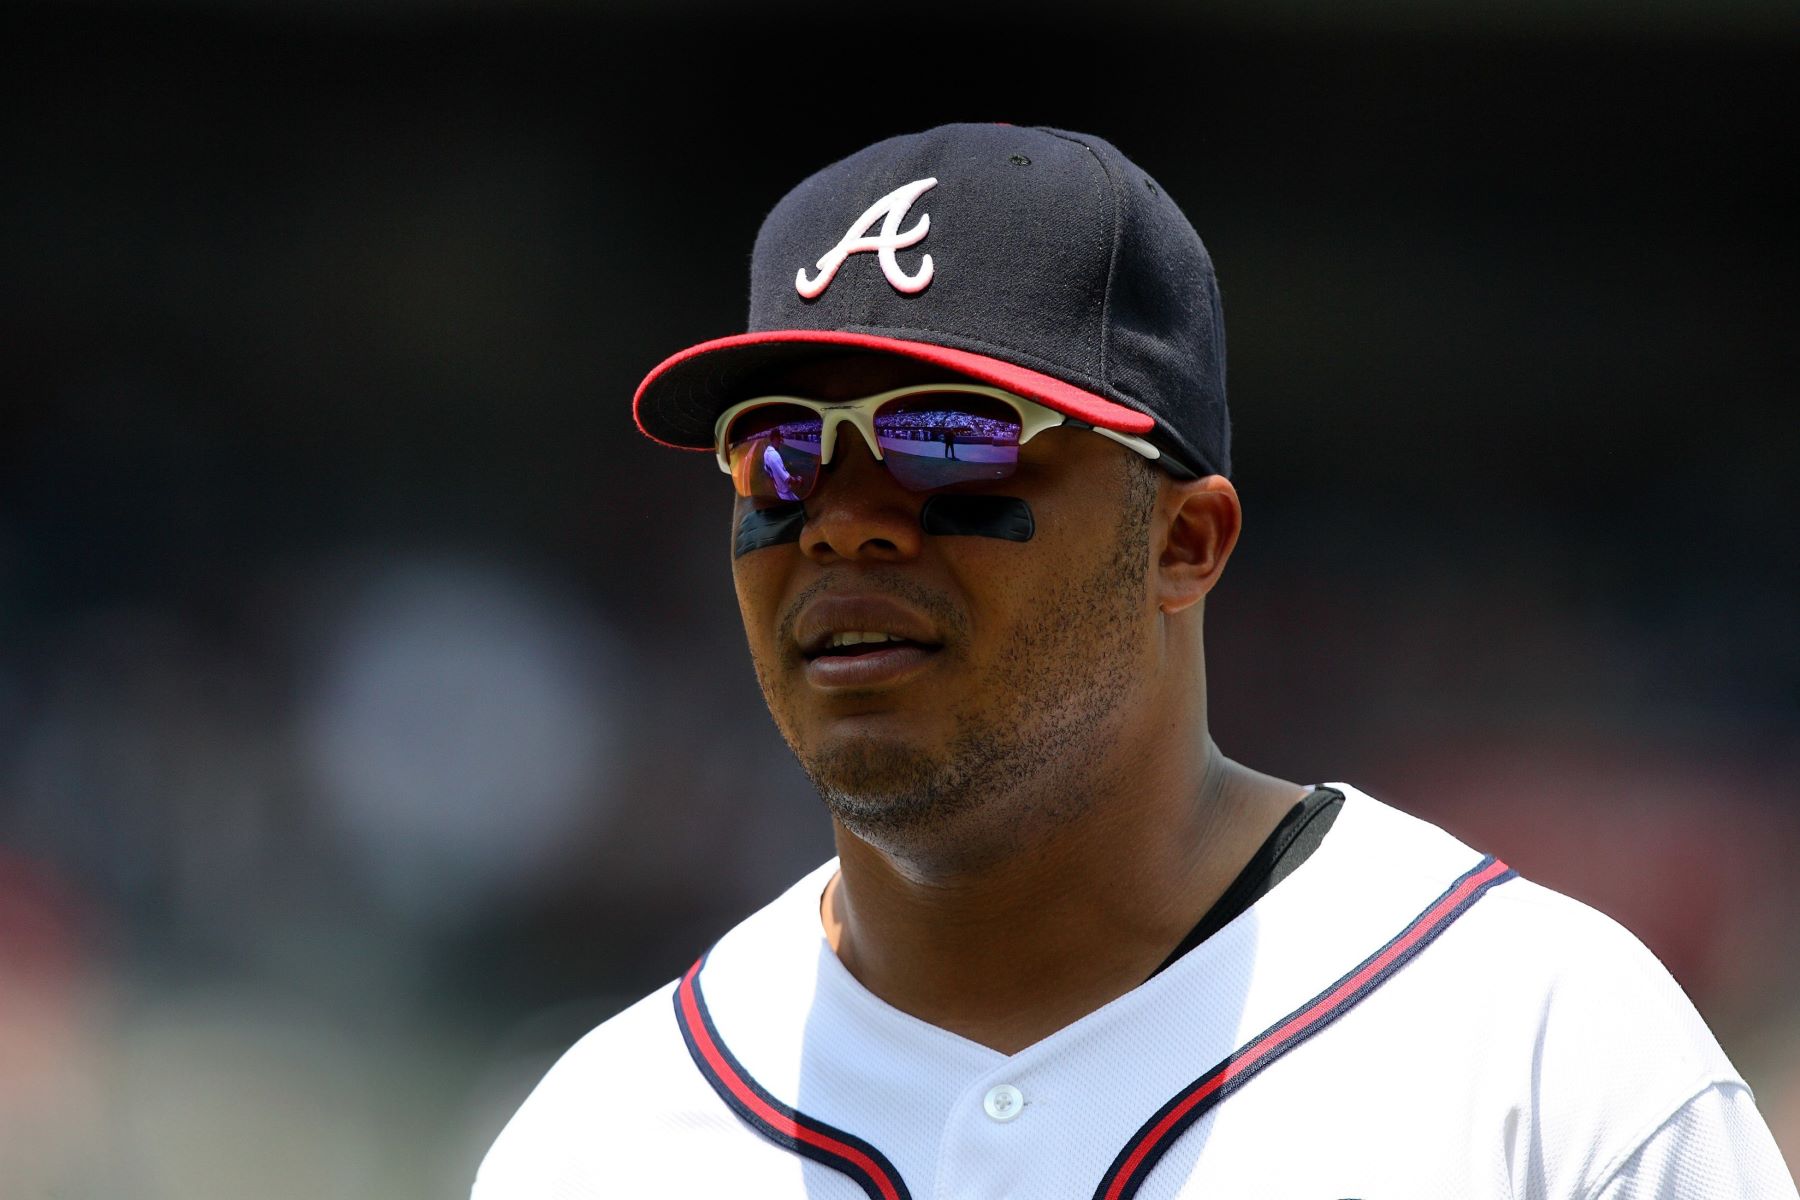 Will Andruw Jones Make It to the Hall of Fame? Exploring His